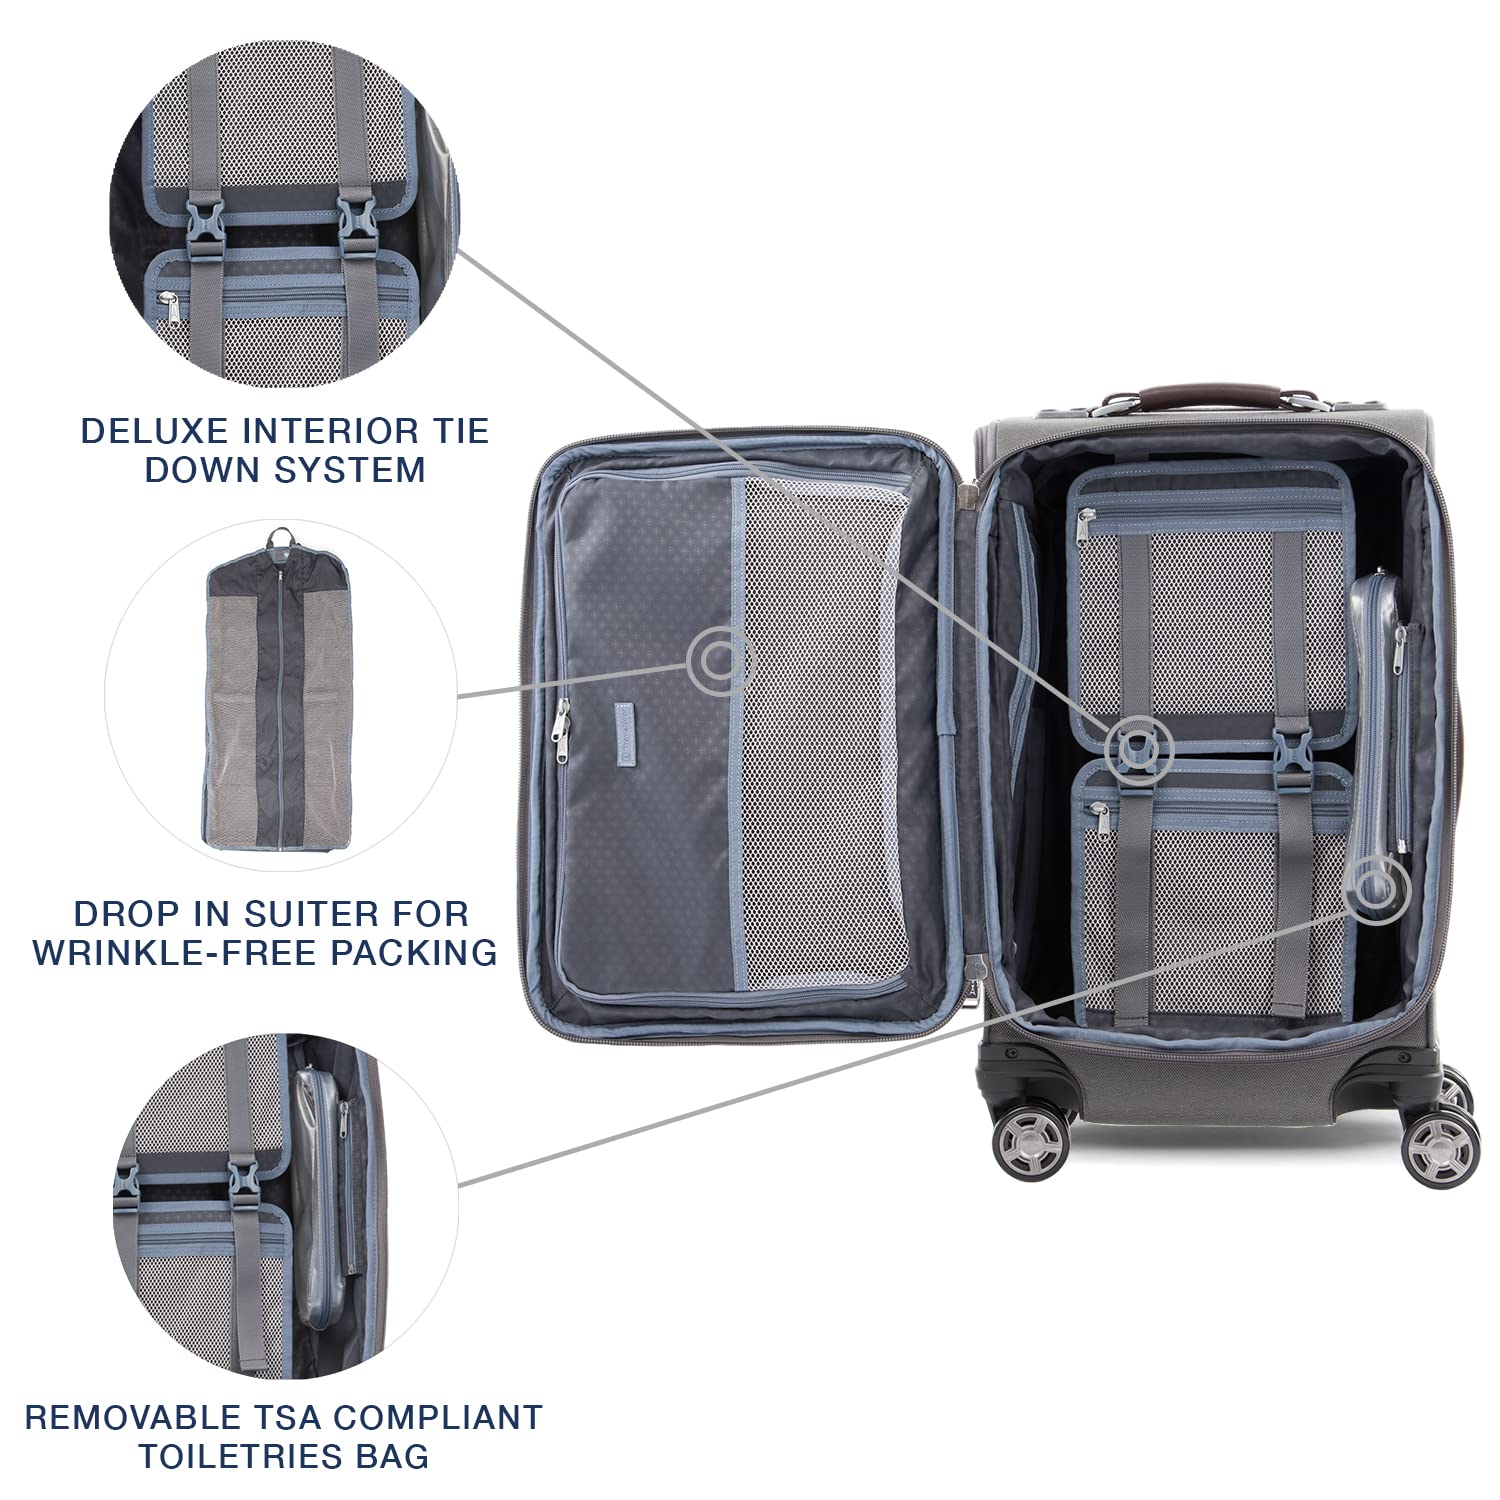 Travelpro Platinum Elite Softside Expandable Carry on Luggage, 8 Wheel Spinner Suitcase, USB Port, Suiter, Men and Women, Vintage Grey, Carry On 21-Inch